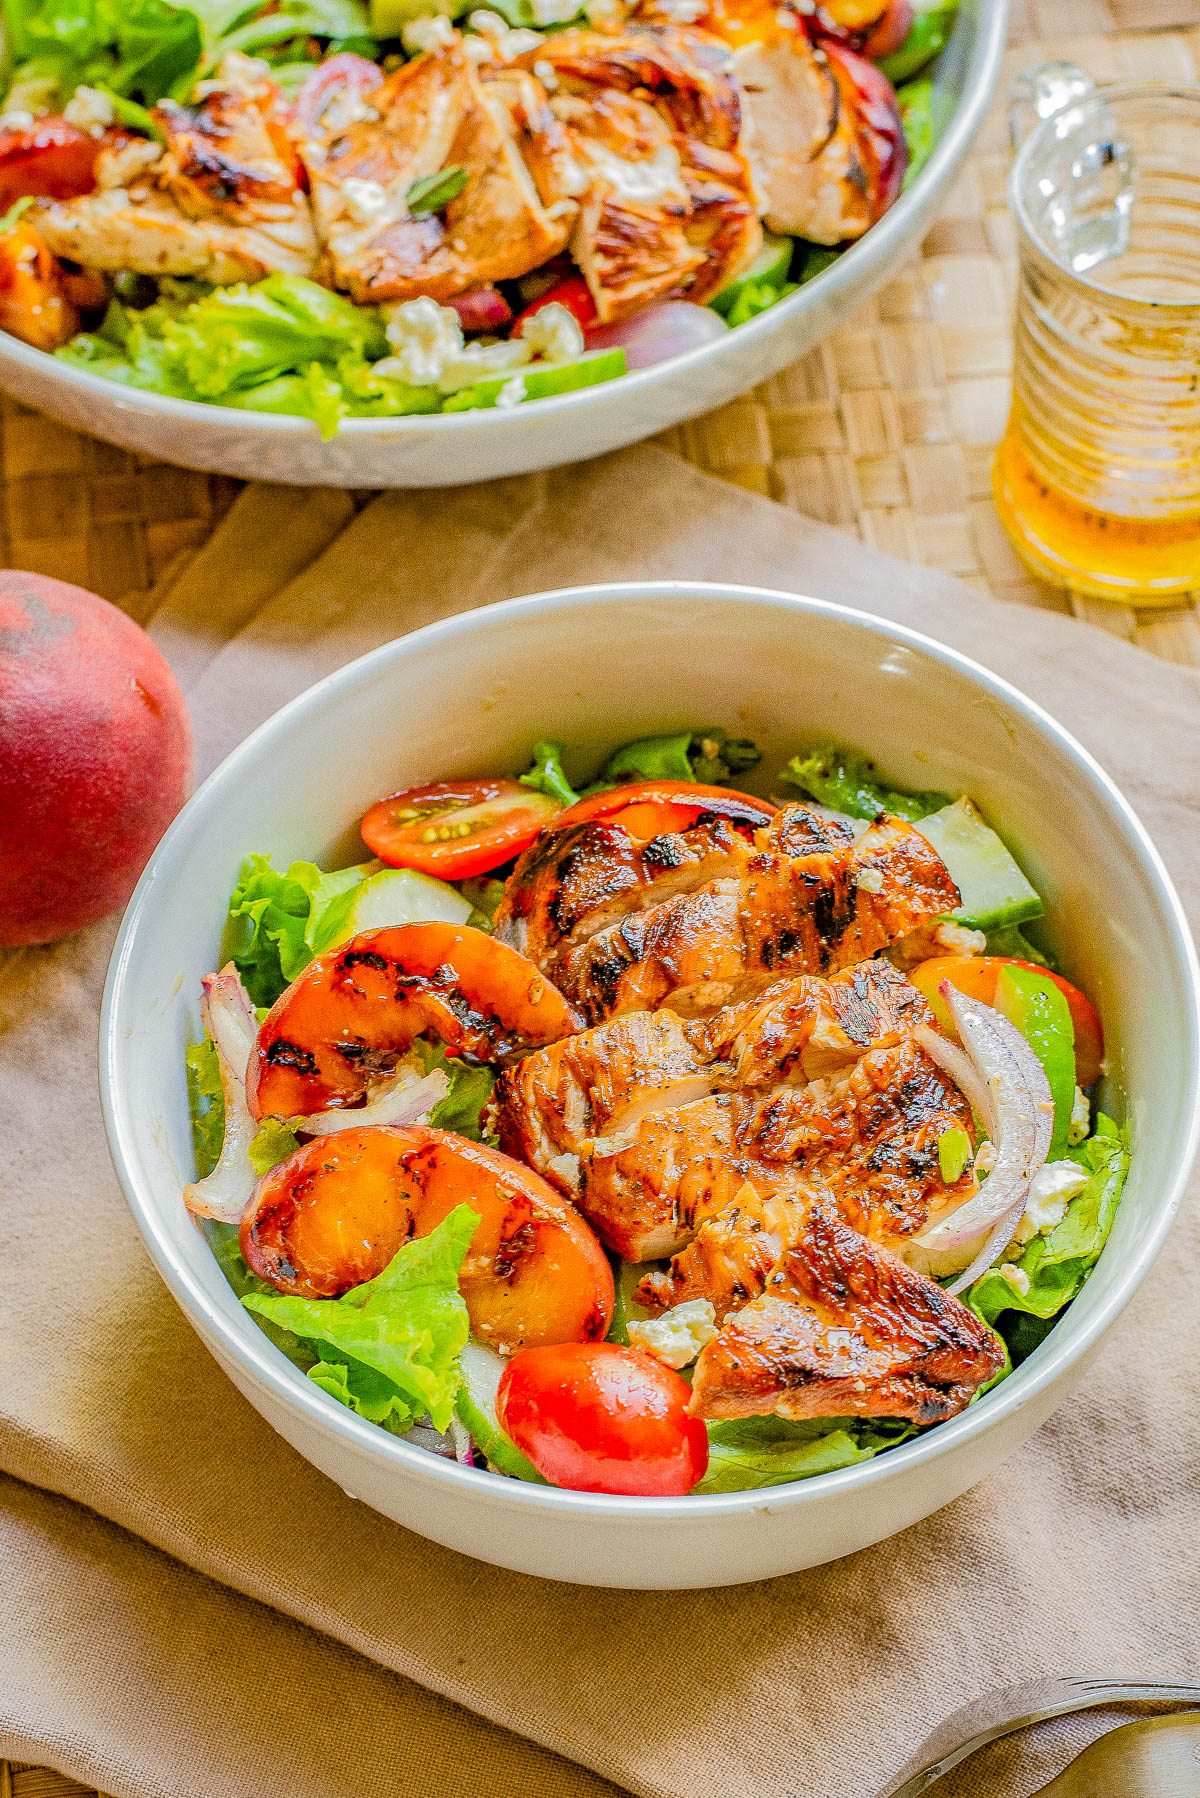 Two bowls of salad topped with grilled chicken, peaches, tomatoes, and leafy greens. One bowl is in the foreground, and a peach and a glass of iced tea can be seen on the table.